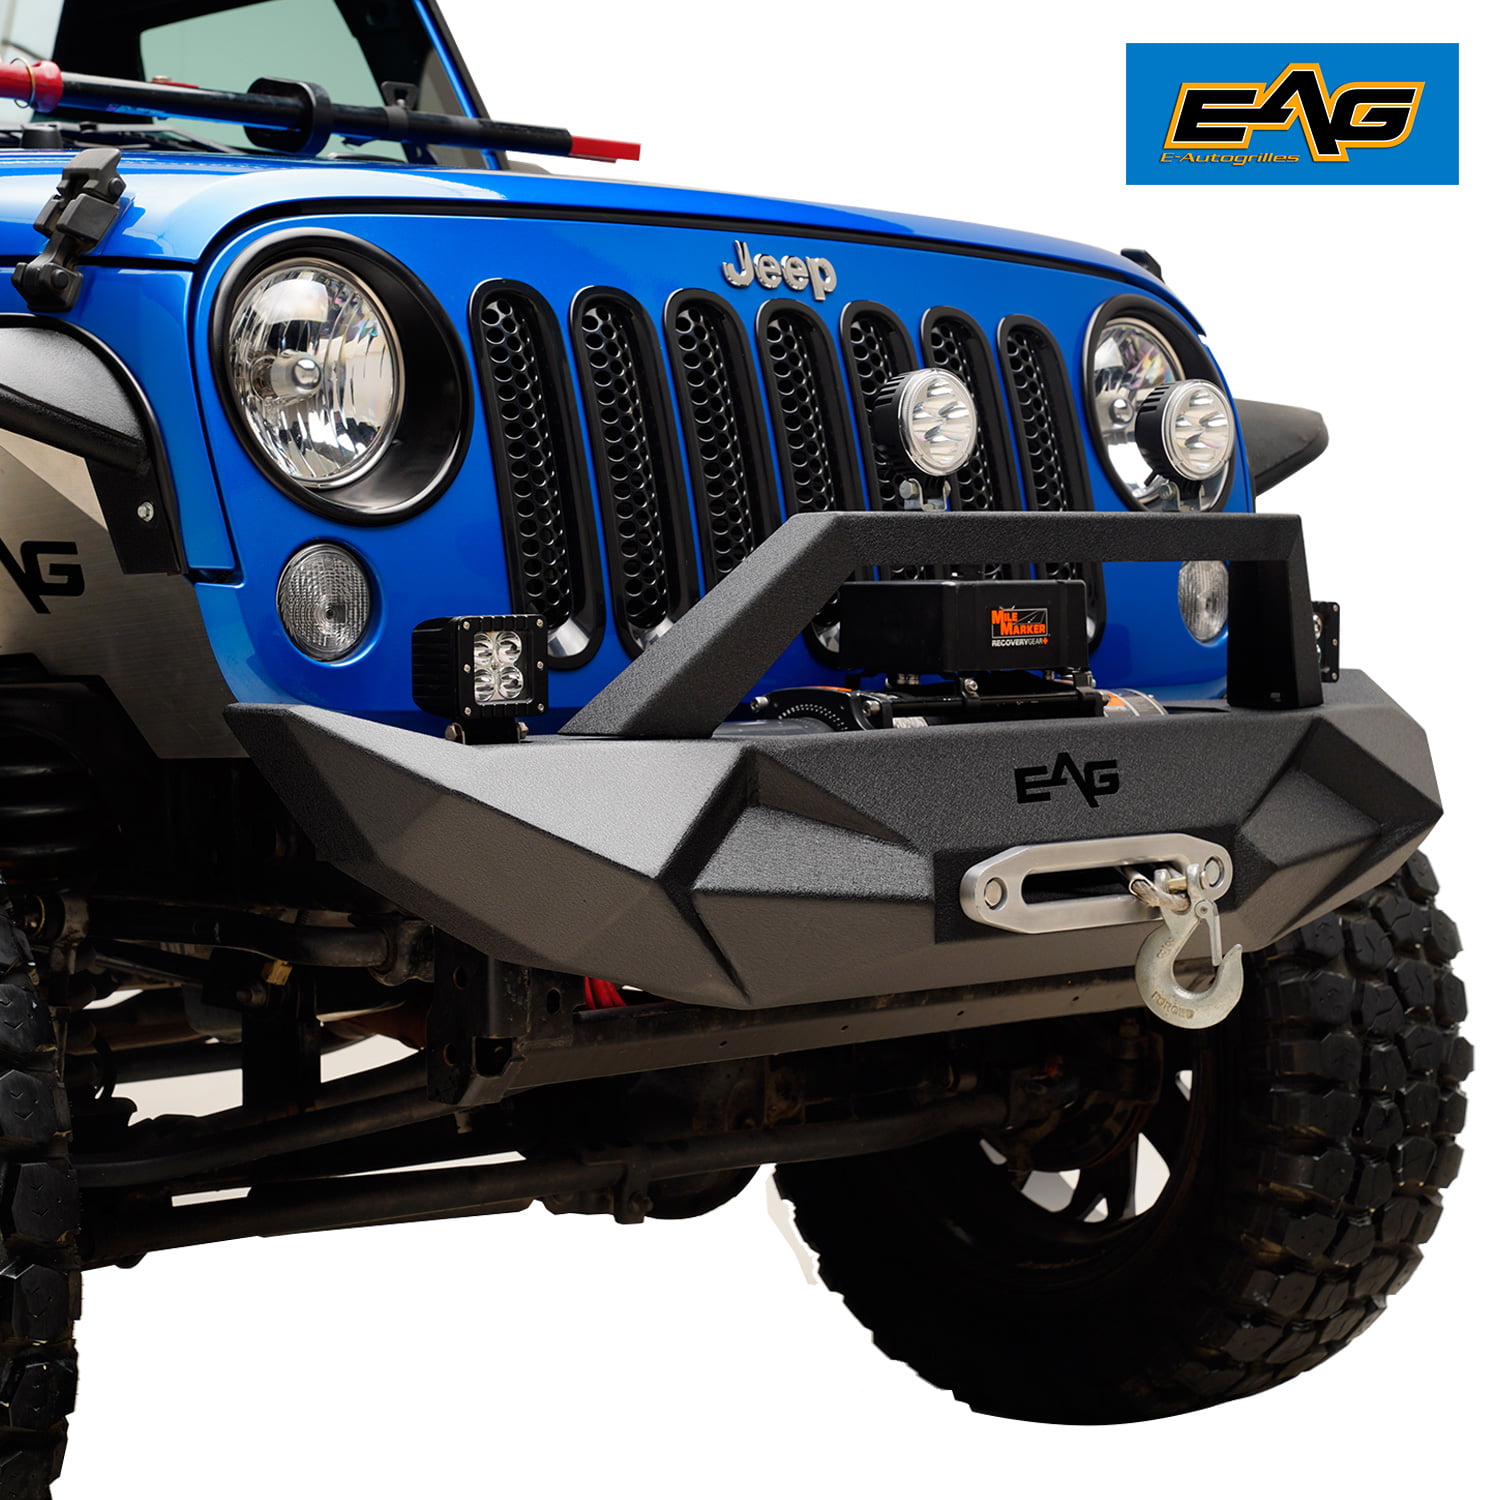 EAG Off Road Front Bumper with Winch Plate Fit for 07-18 Wrangler JK -  